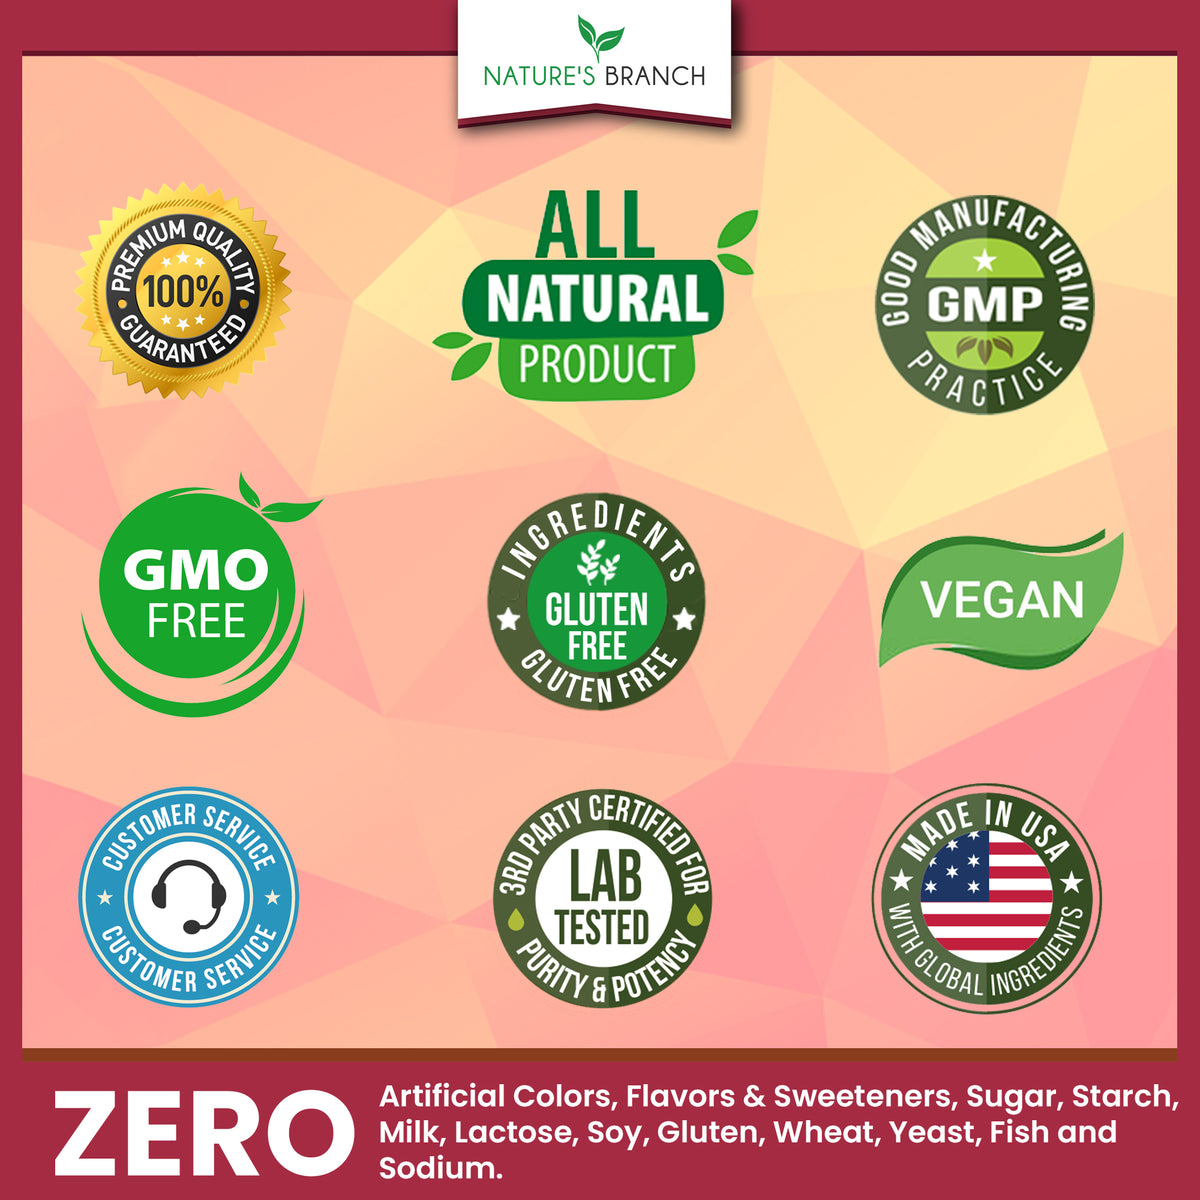 Certification badges shwoing vegan made in usa third party tested and non gmo